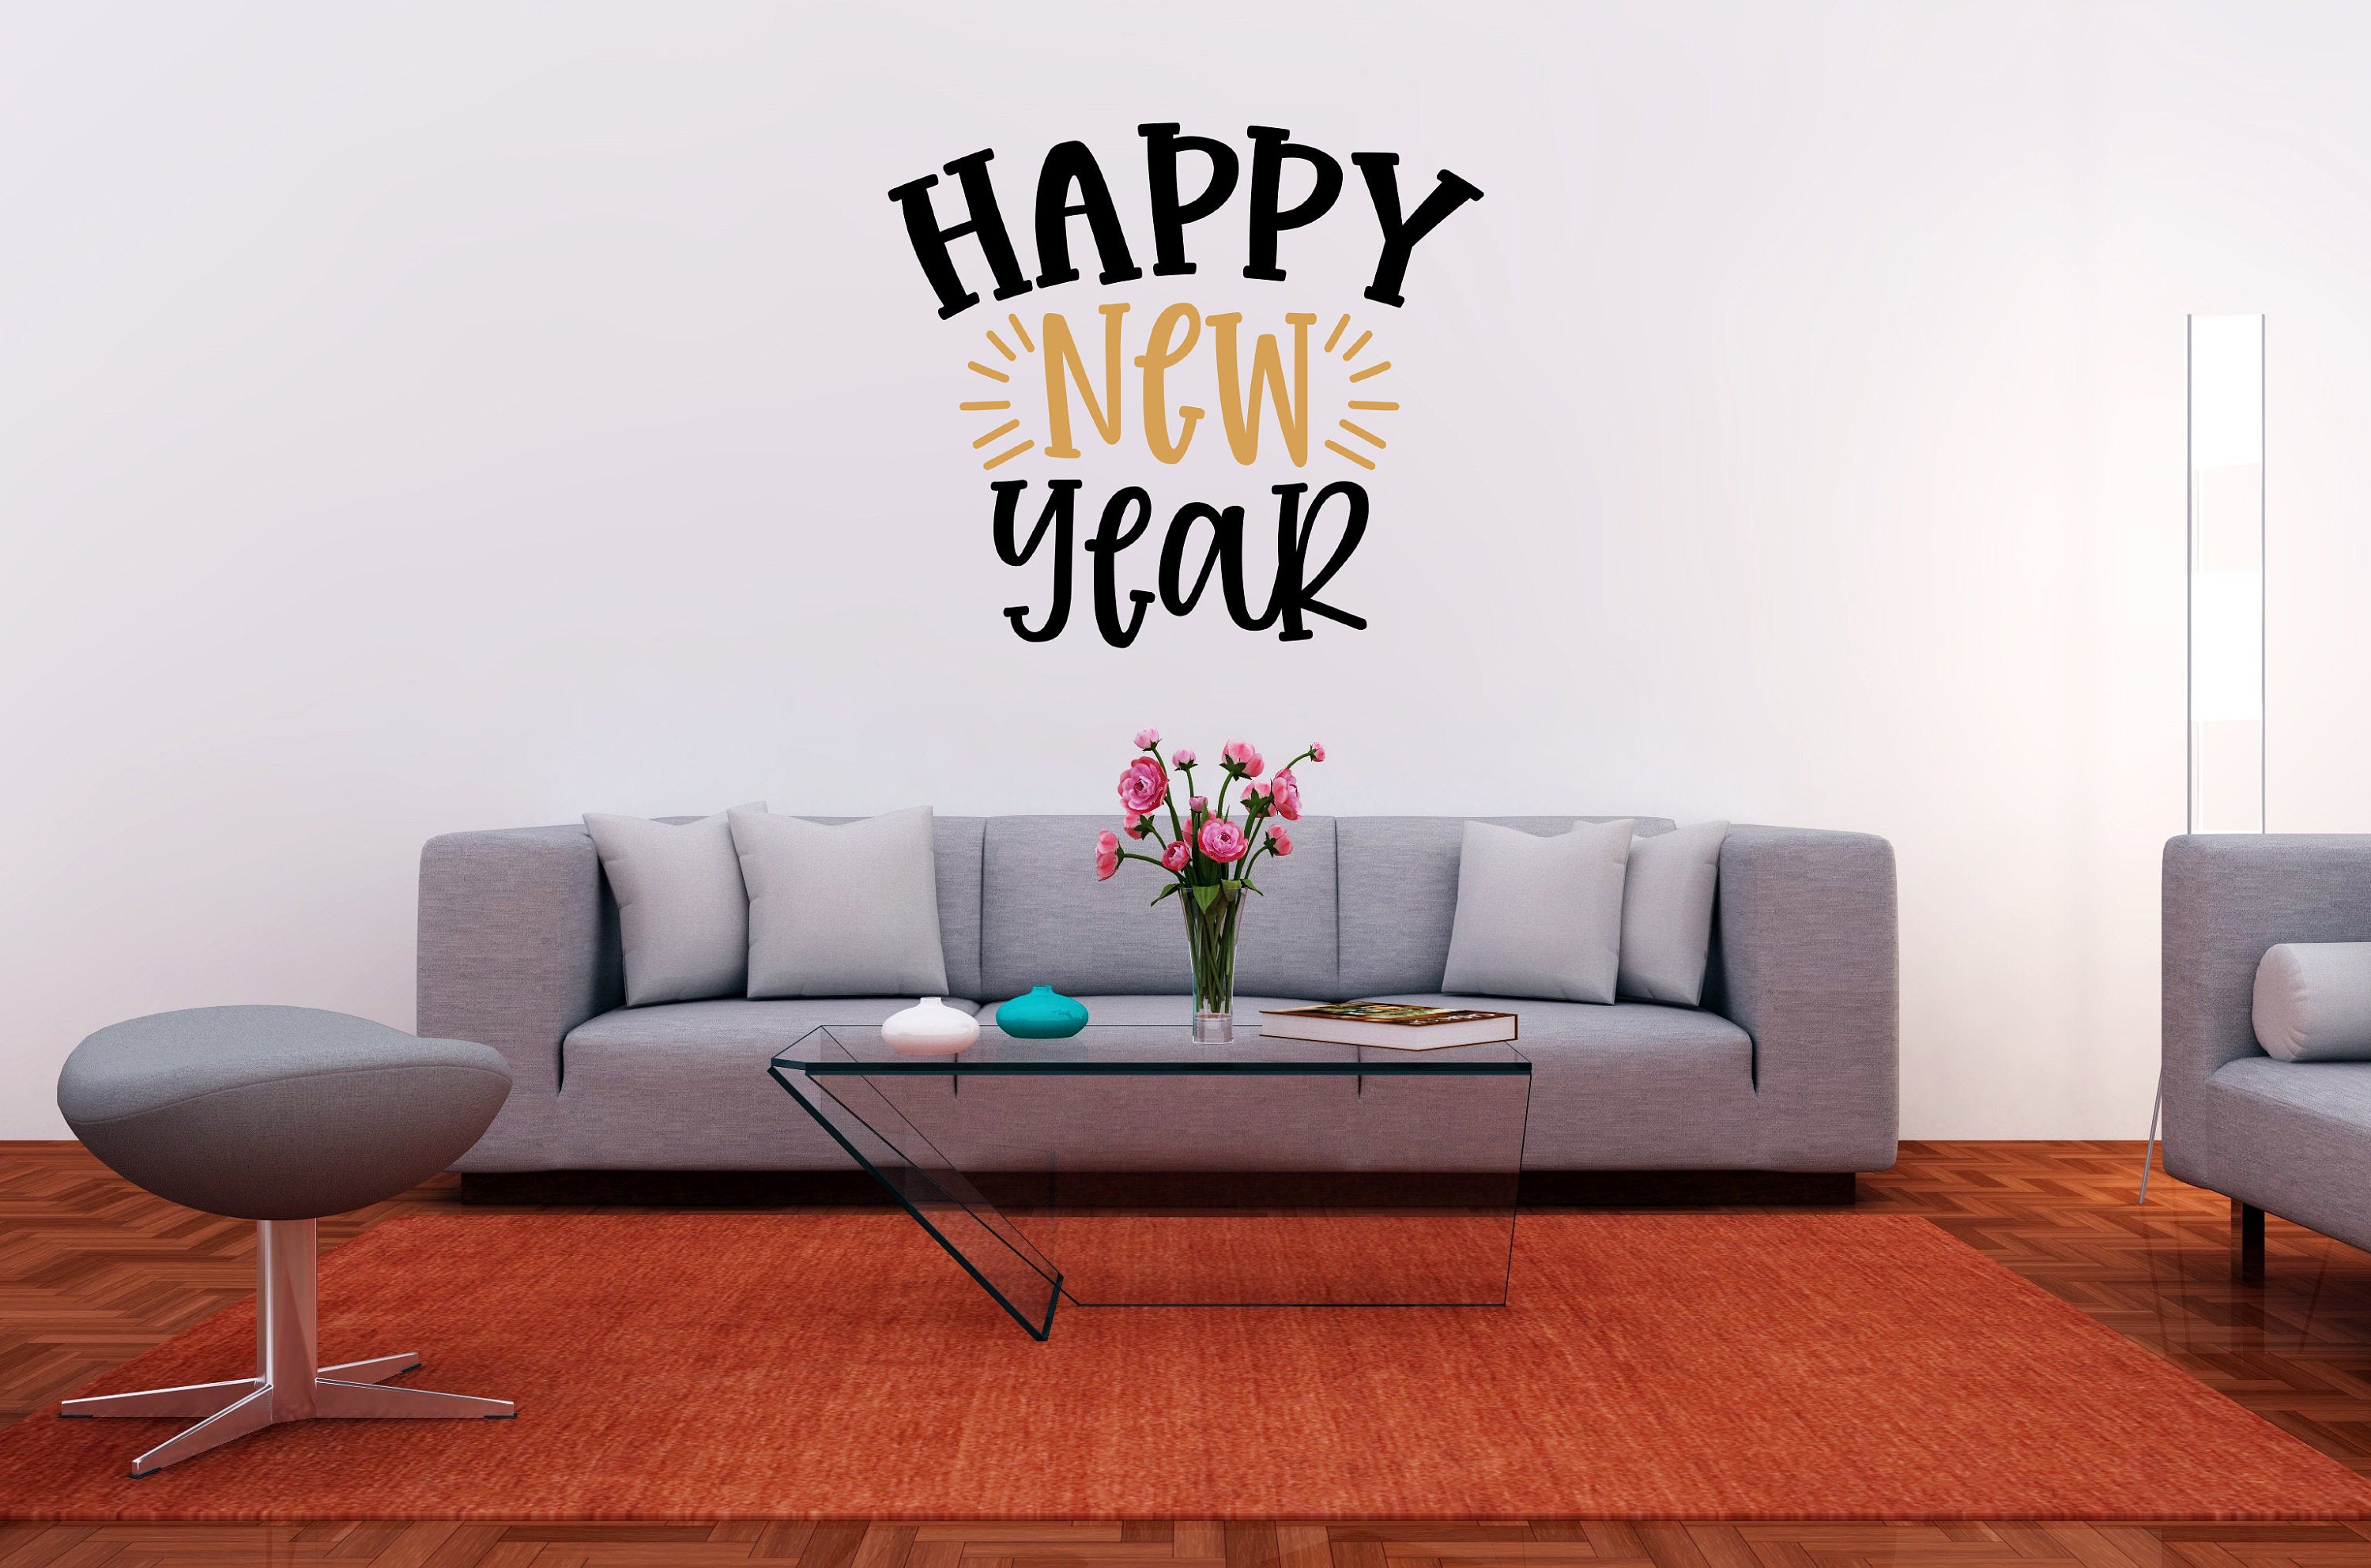 Happy New Year Vinyl Decal for DIY Signs, Walls, Wood, Metal, New Year's Eve Party & Event Decor, Gift,